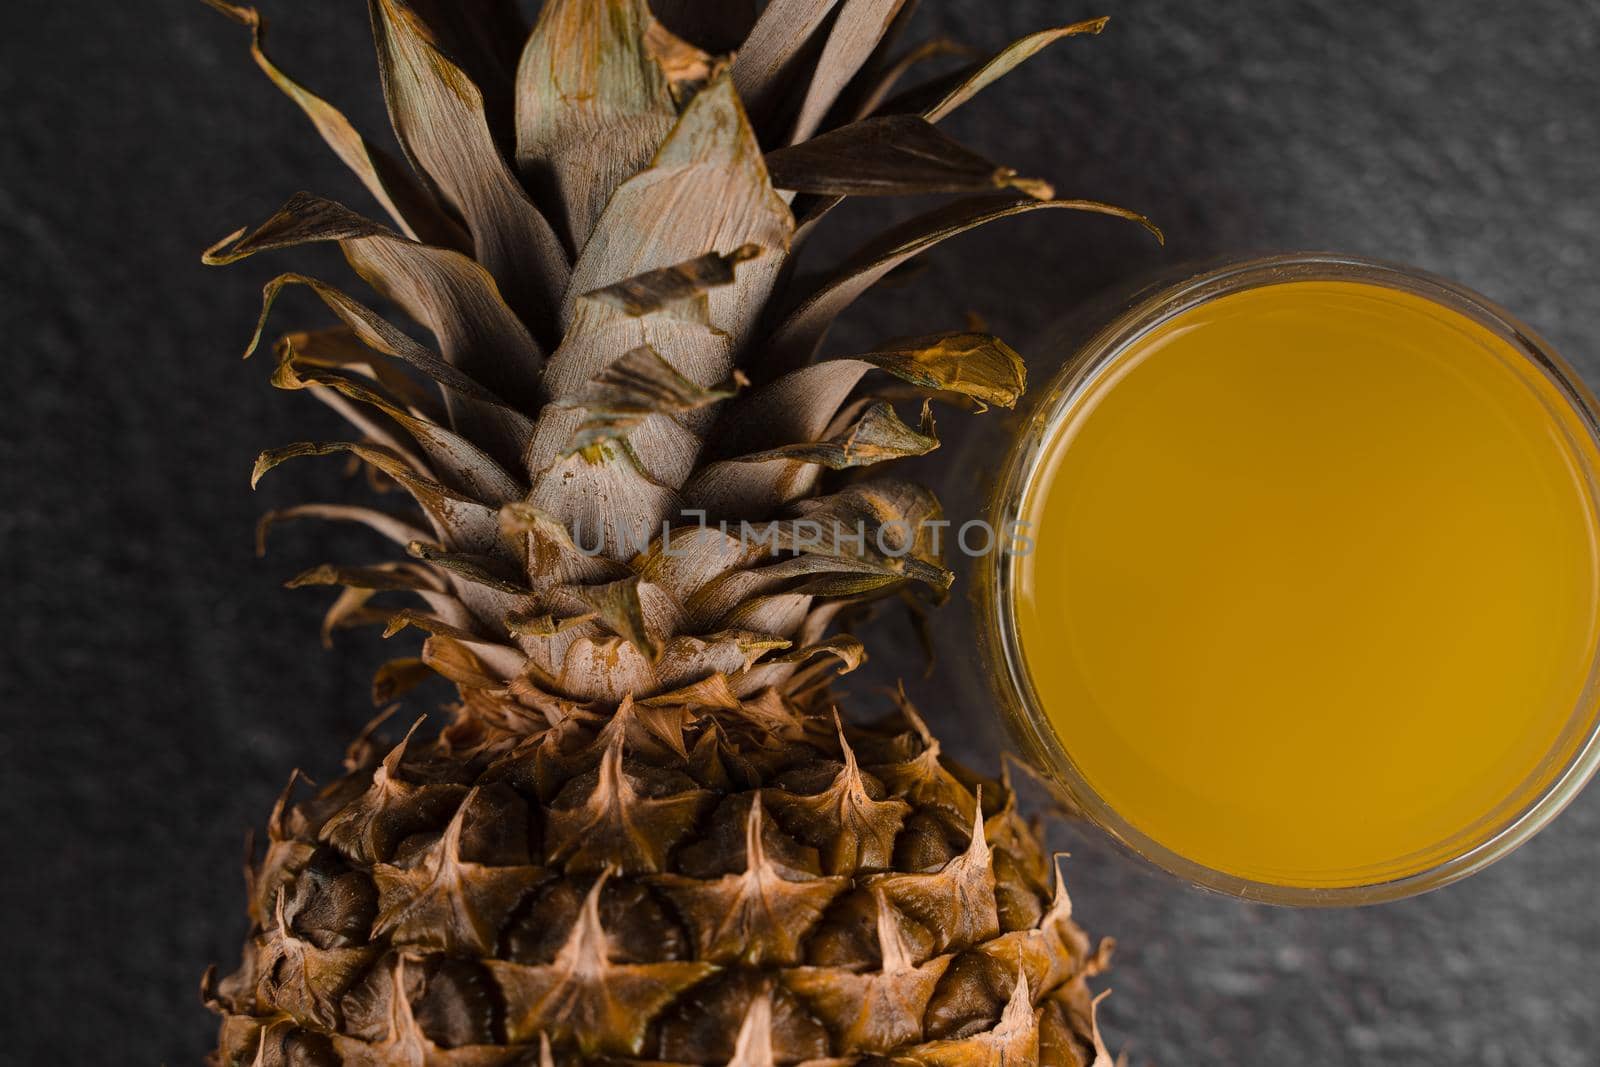 Pineapple fruit and juice in double glass cup on black stone background. Pouring yellow tropical fruit juice into glass.